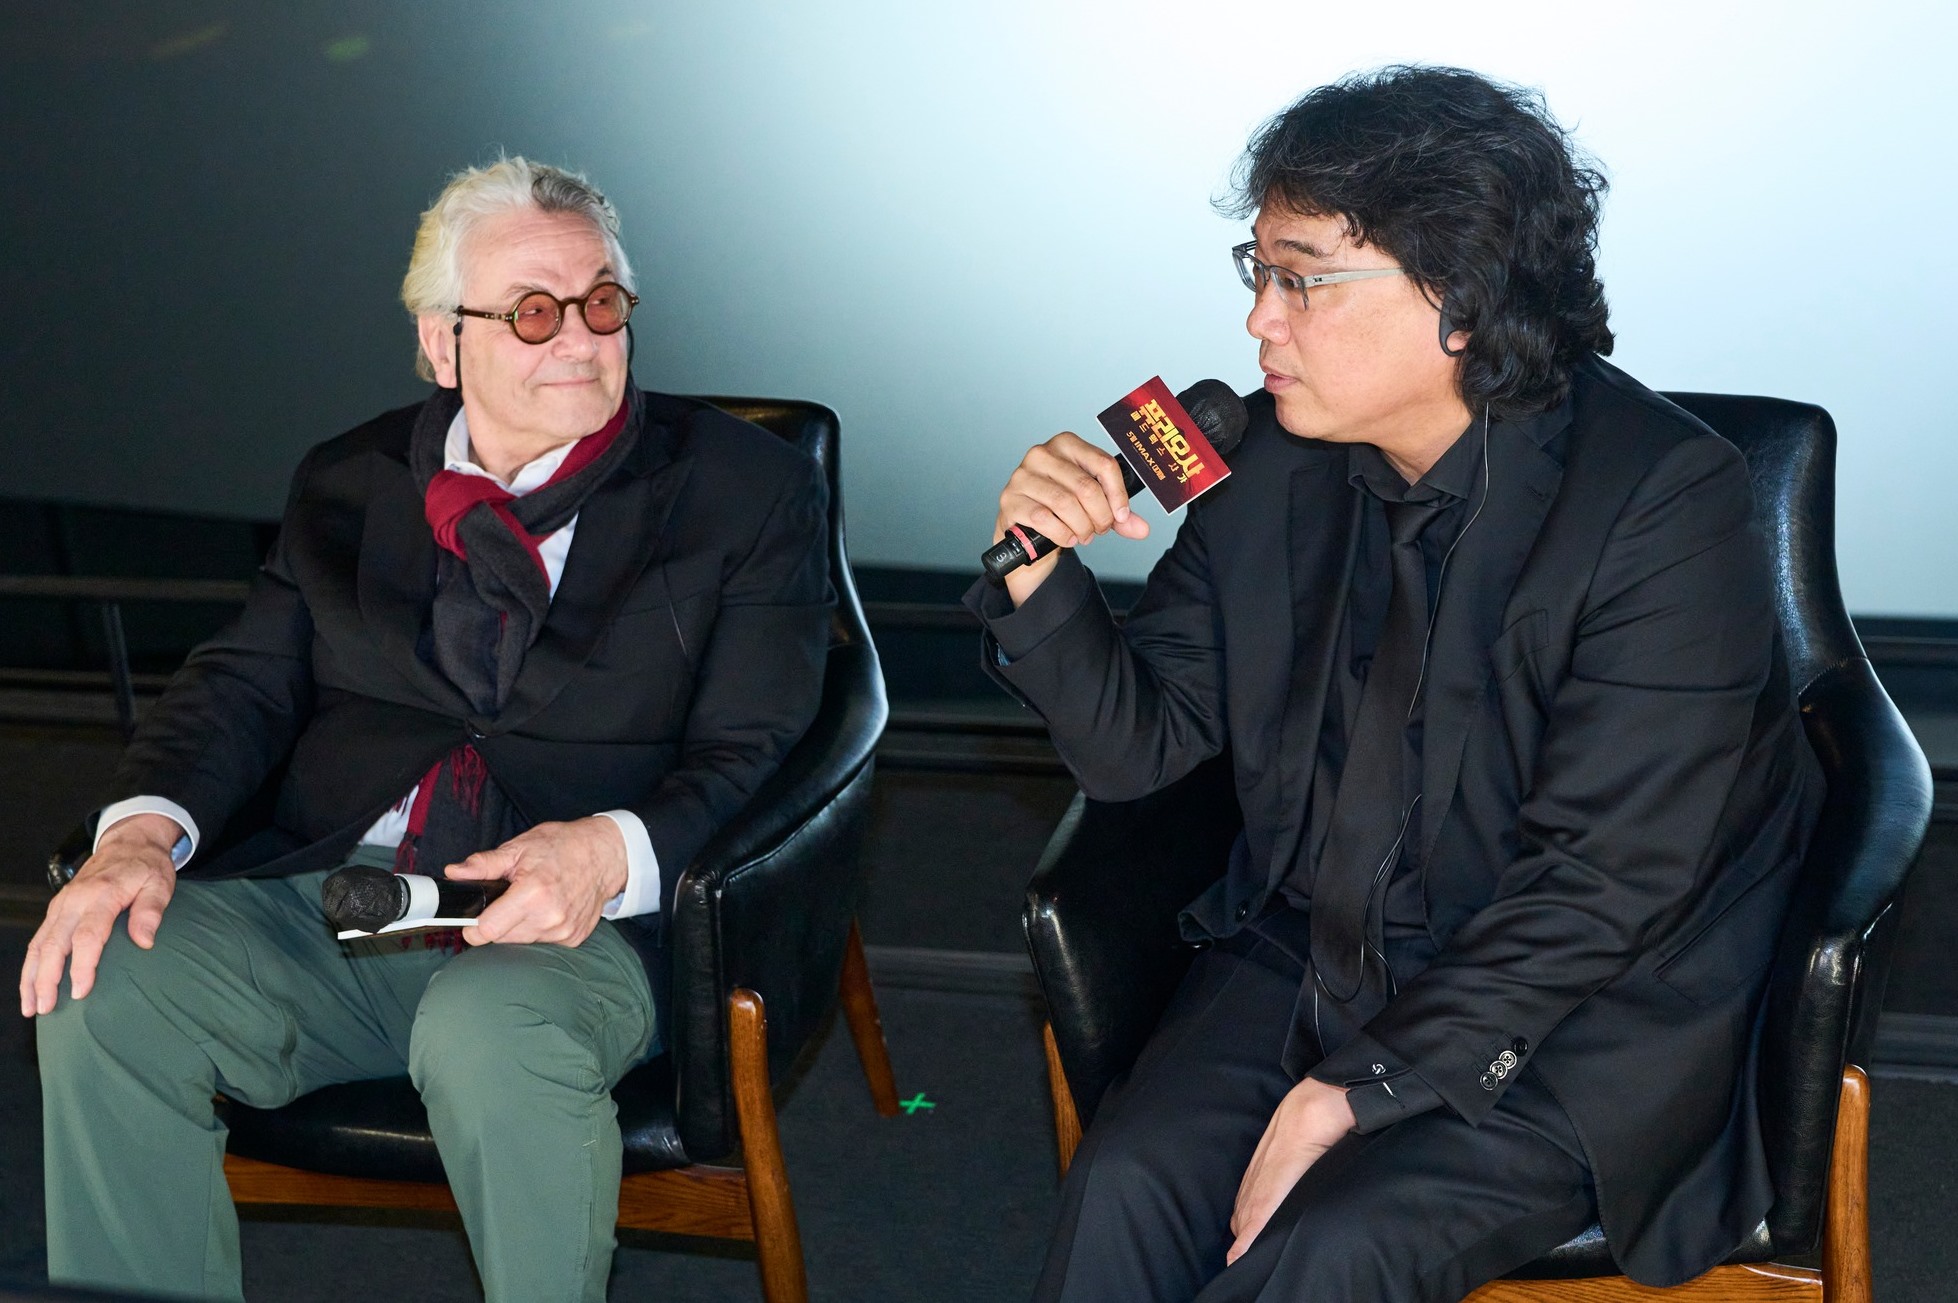 Directors George Miller (left) and Bong Joon-ho on April 14 discuss each other's movies at a Q&A with the audience for 